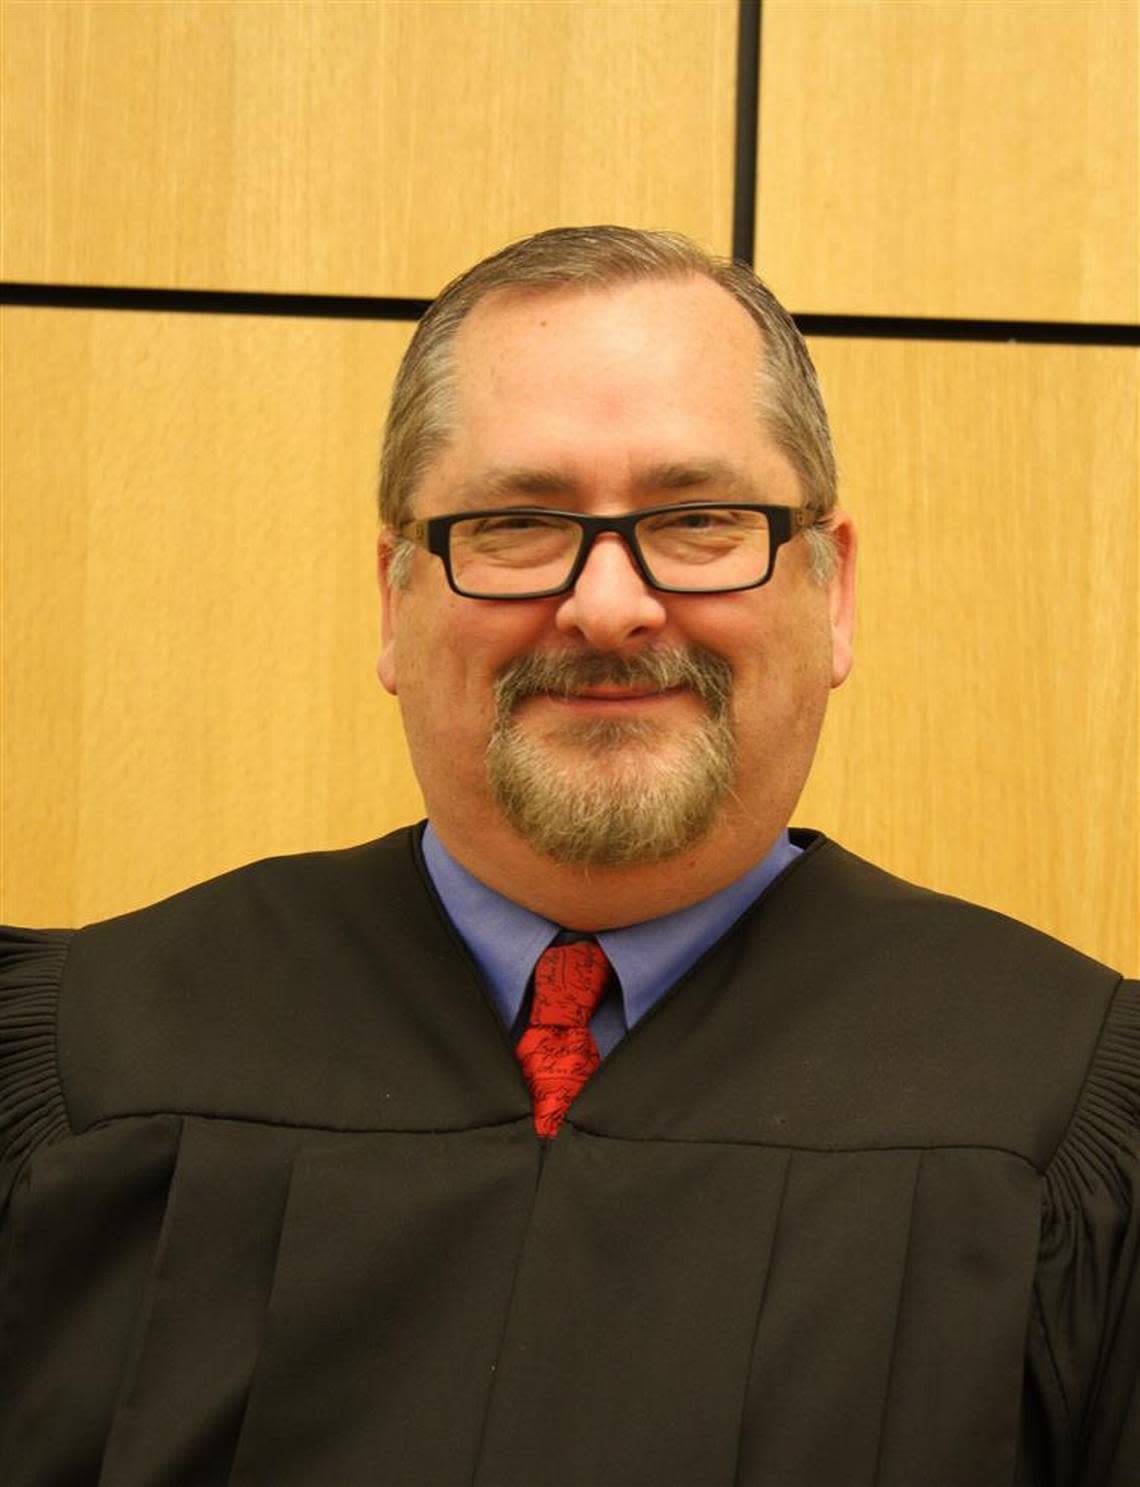 Judge Terry Tanner